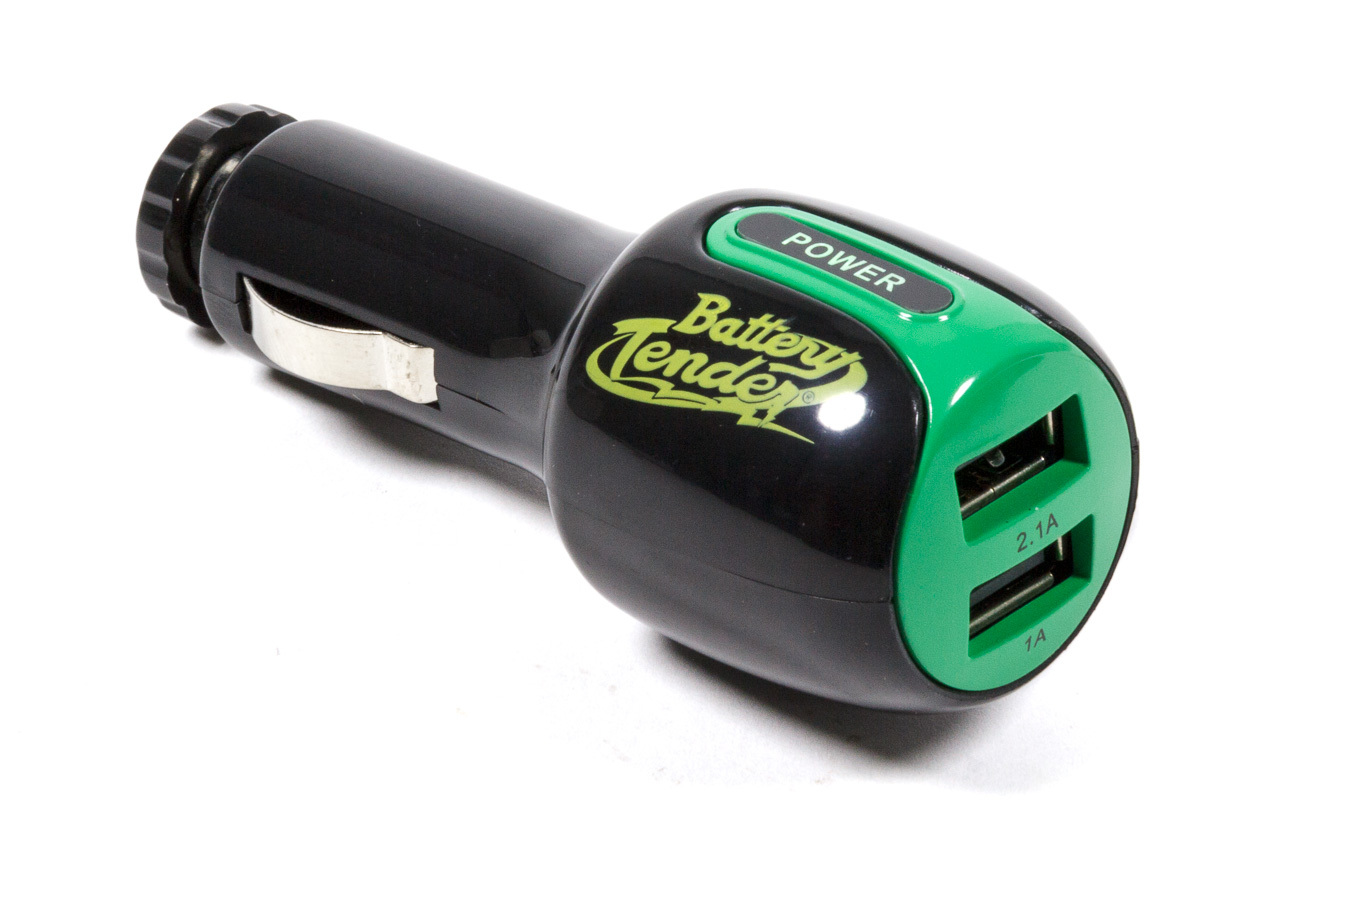 BATTERY TENDER Battery Charger, 12V Car Outlet, One 1 amp And One 2 amp Ports, USB, Plastic, Black, Universal, Each